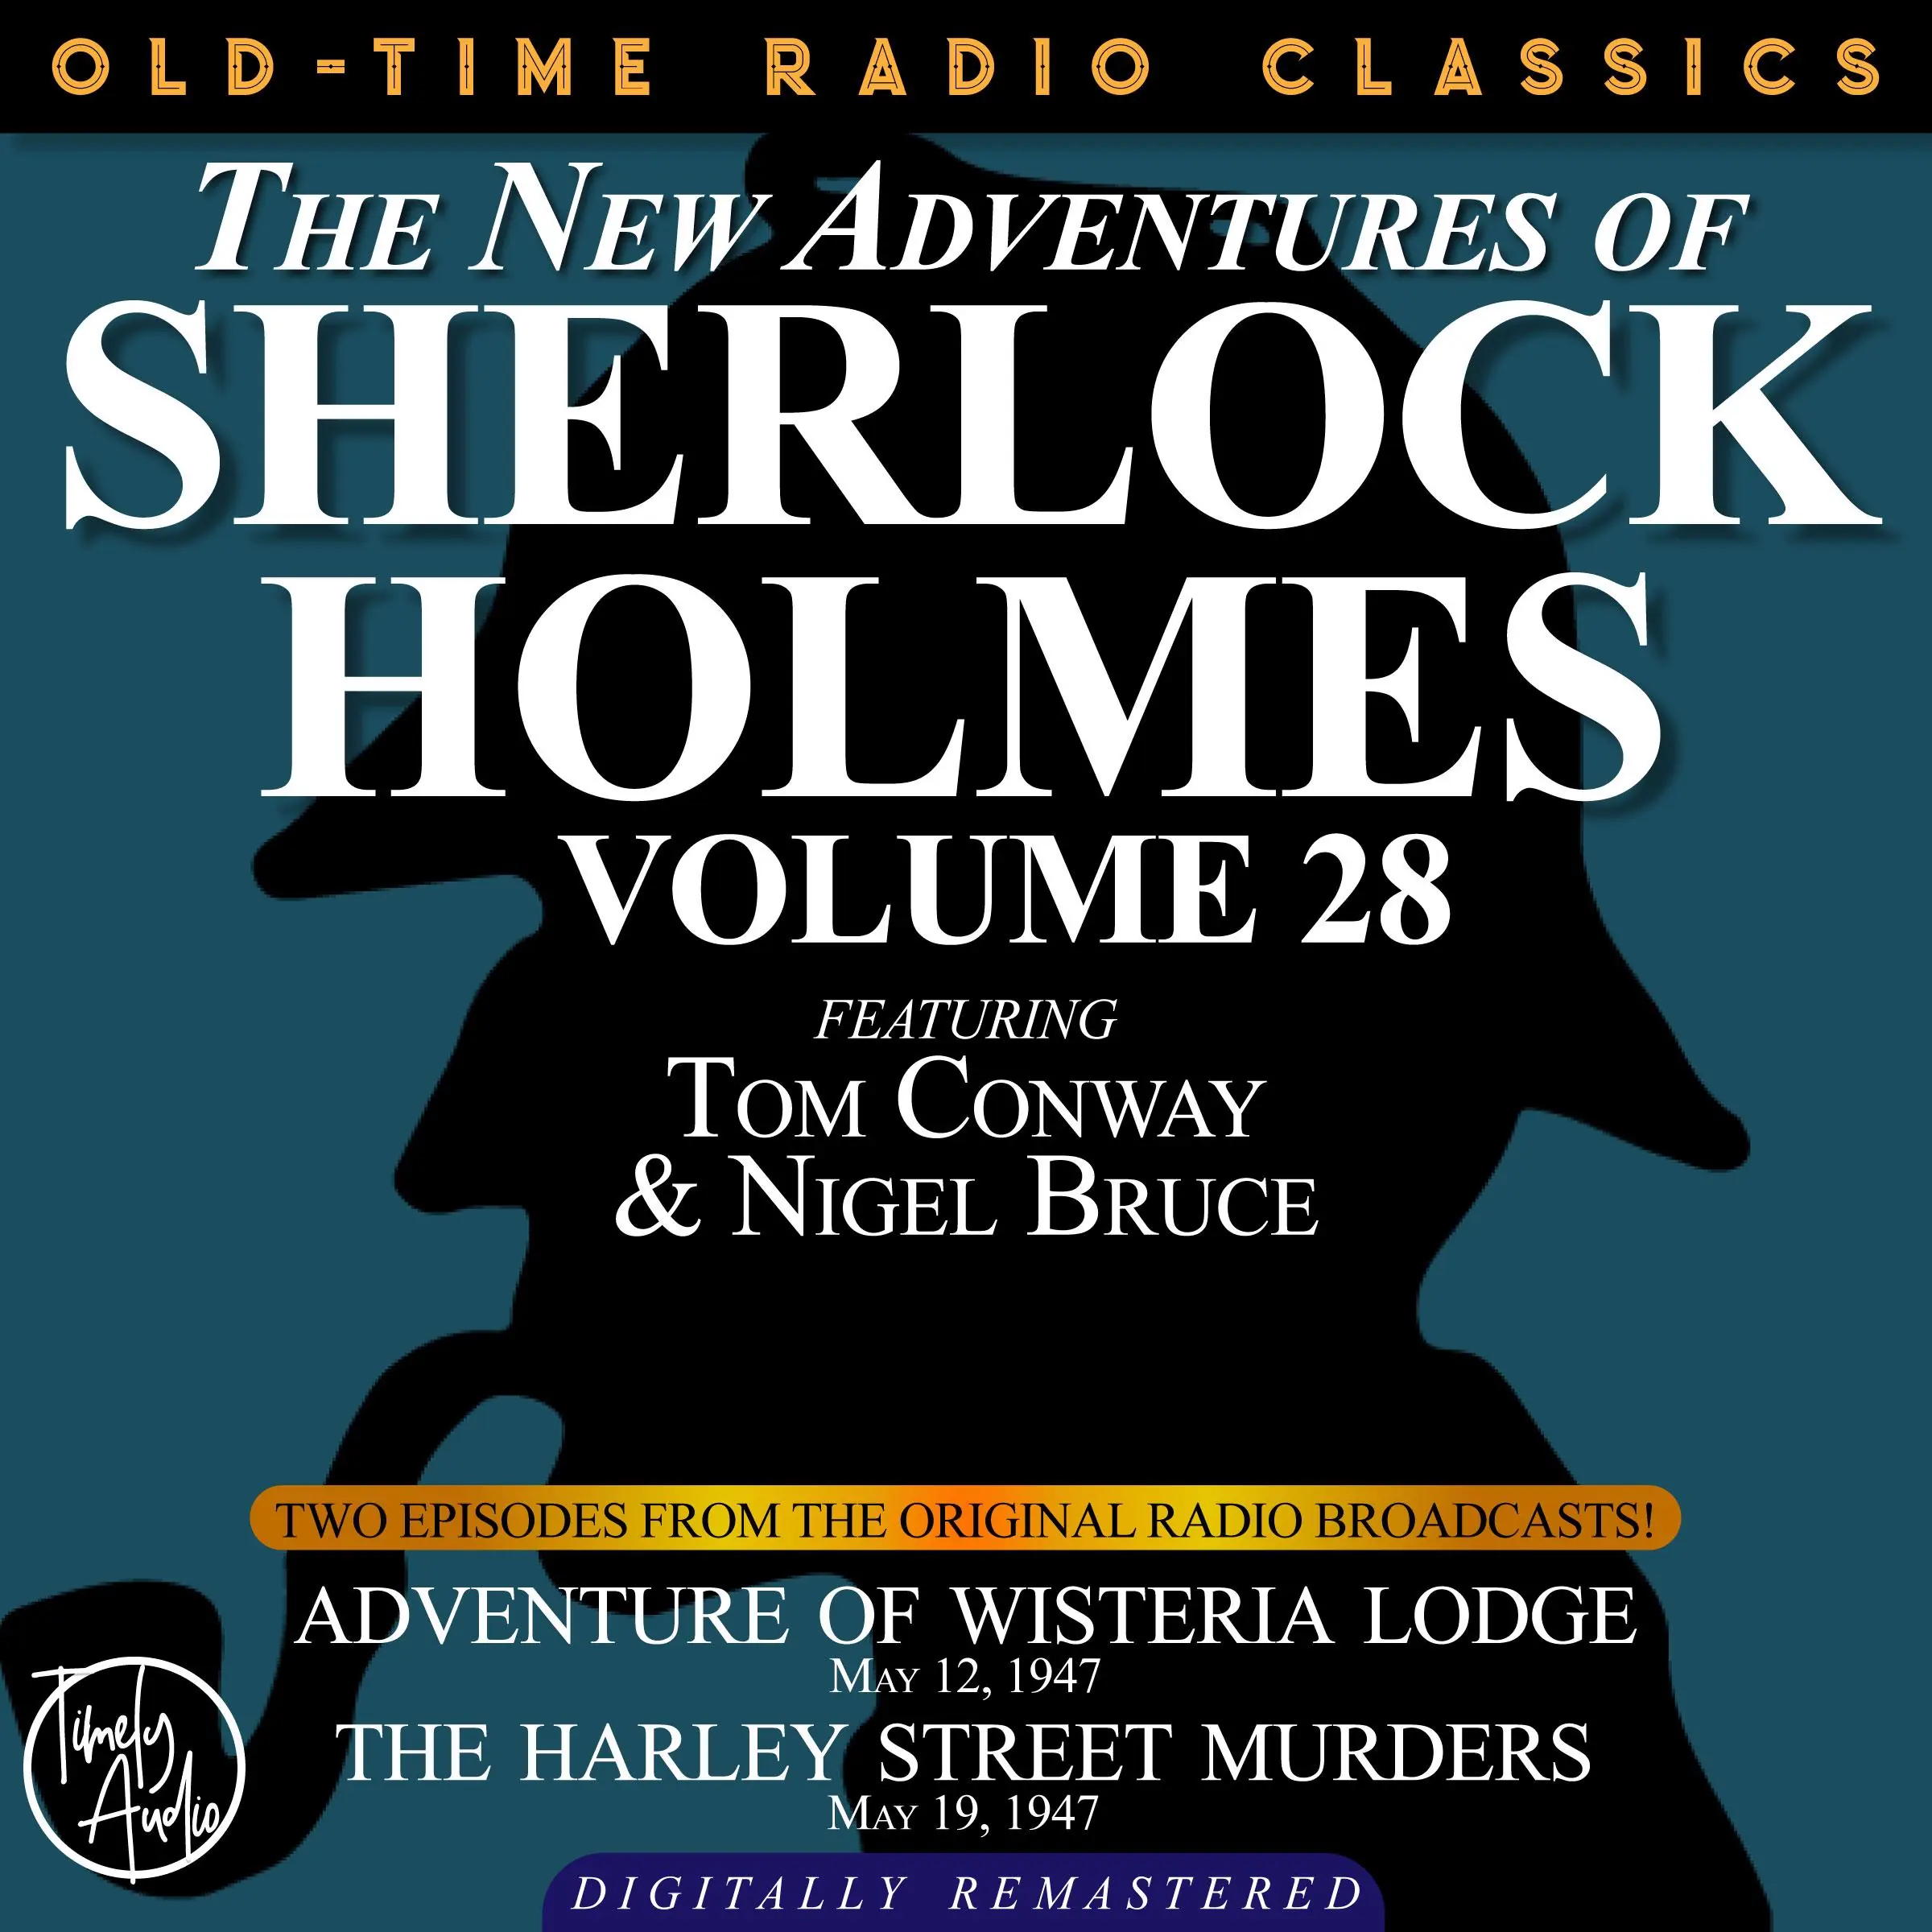 THE NEW ADVENTURES OF SHERLOCK HOLMES, VOLUME 28:   EPISODE 1: ADVENTURE OF WISTERIA LODGE 2: THE HARLEY STREET LODGE by Sir Arthur Conan Doyle Audiobook